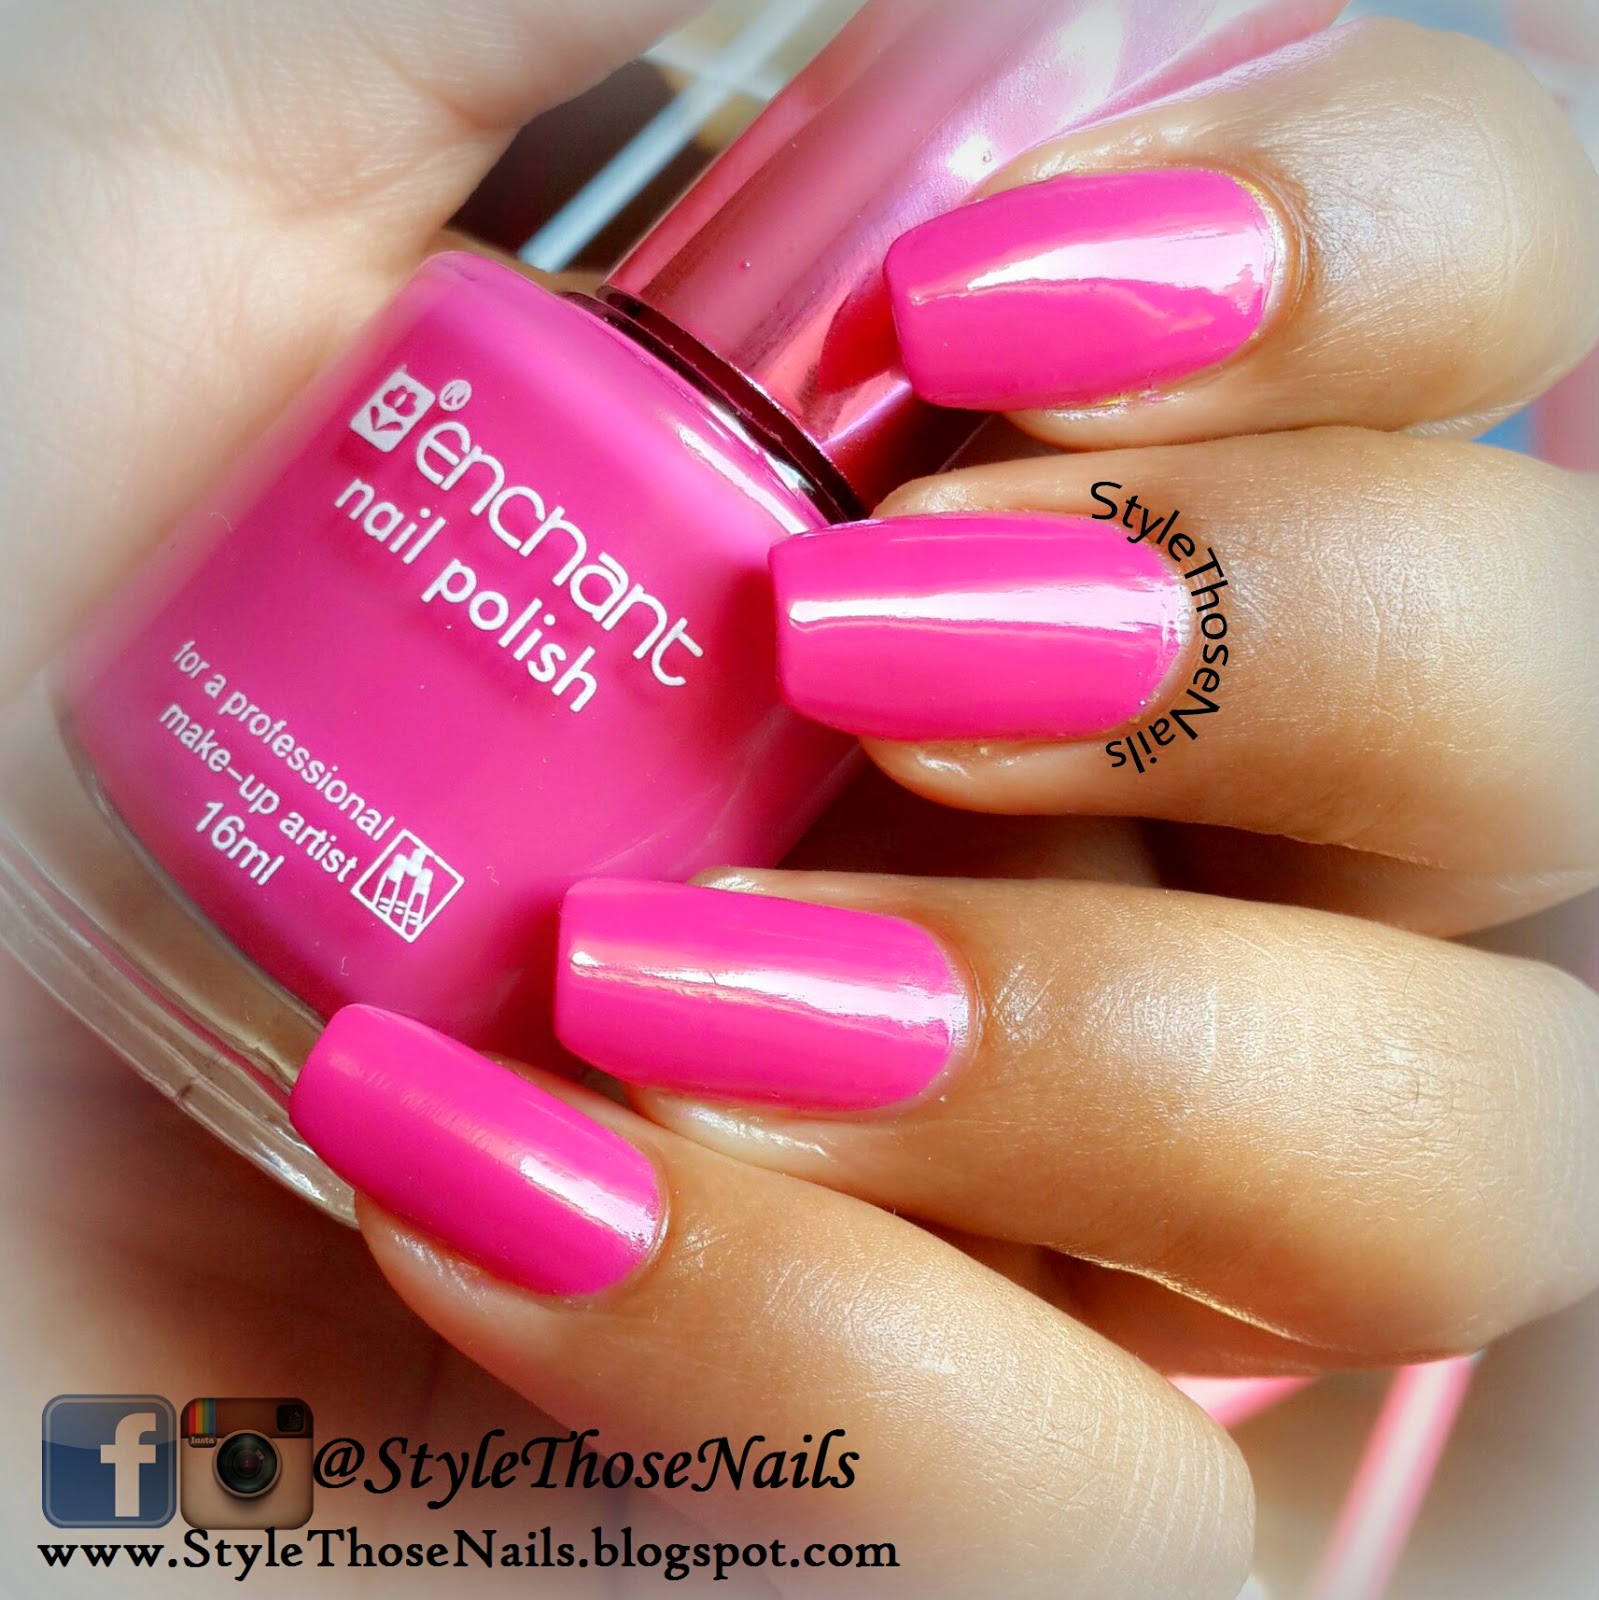 Style Those Nails: Pink Watermable - Breast Cancer Awareness Manicure